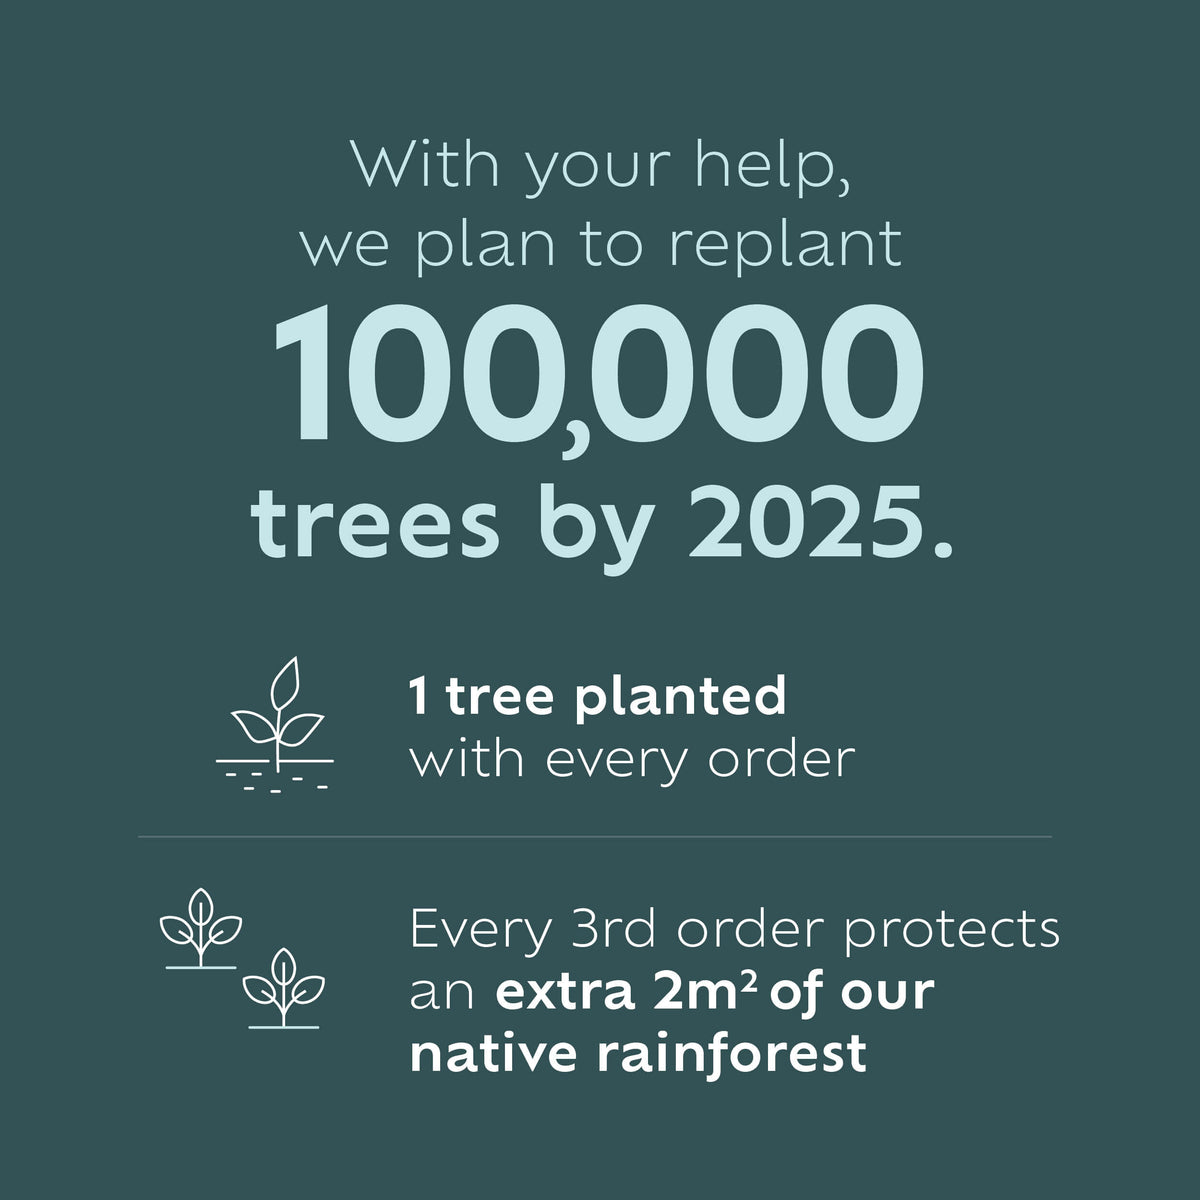 With your help, we plan to replant 100,000 trees by 2025. 1 tree planted with every order and every 3rd order protects an extra 2m2 of our native rainforest.